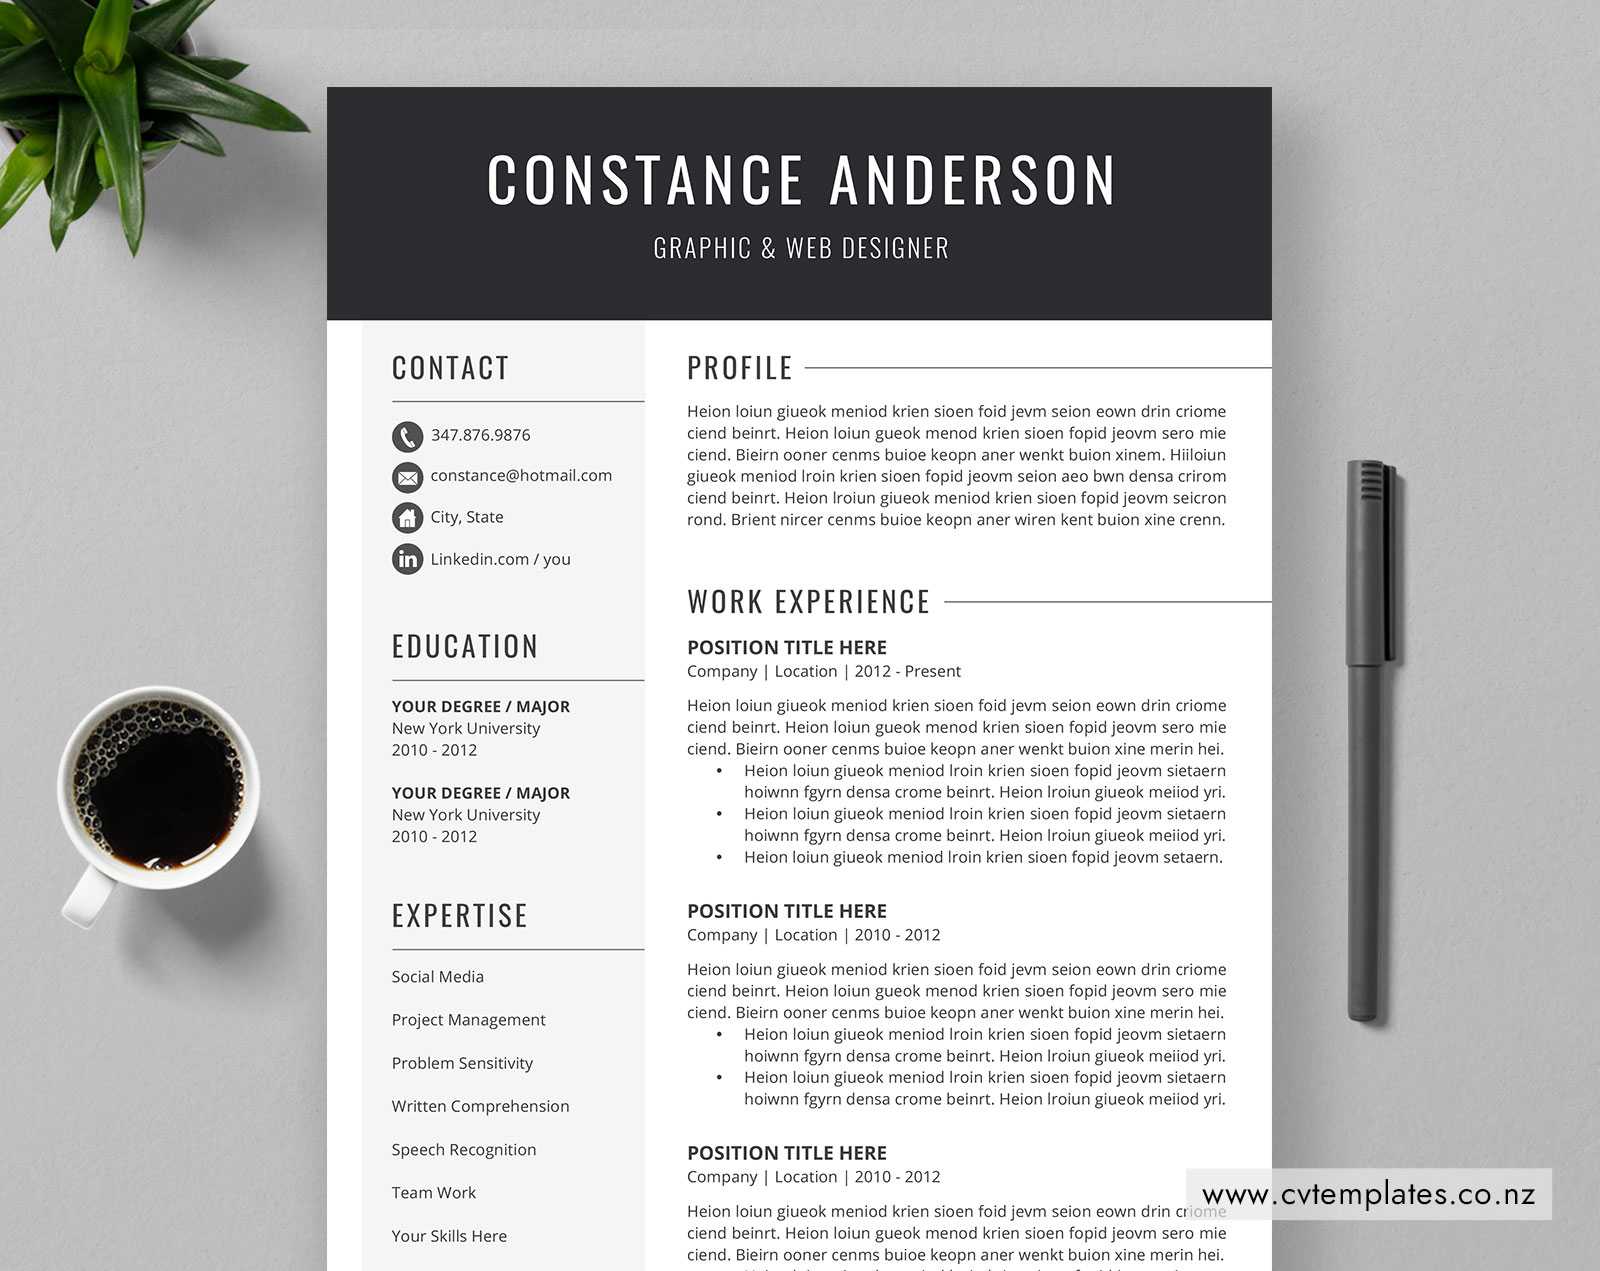 Cv Template For Ms Word, Curriculum Vitae, Professional Cv Template Design,  Editable Cv Template, Cover Letter, References, 1, 2 And 3 Page Resume For Free Downloadable Resume Templates For Word